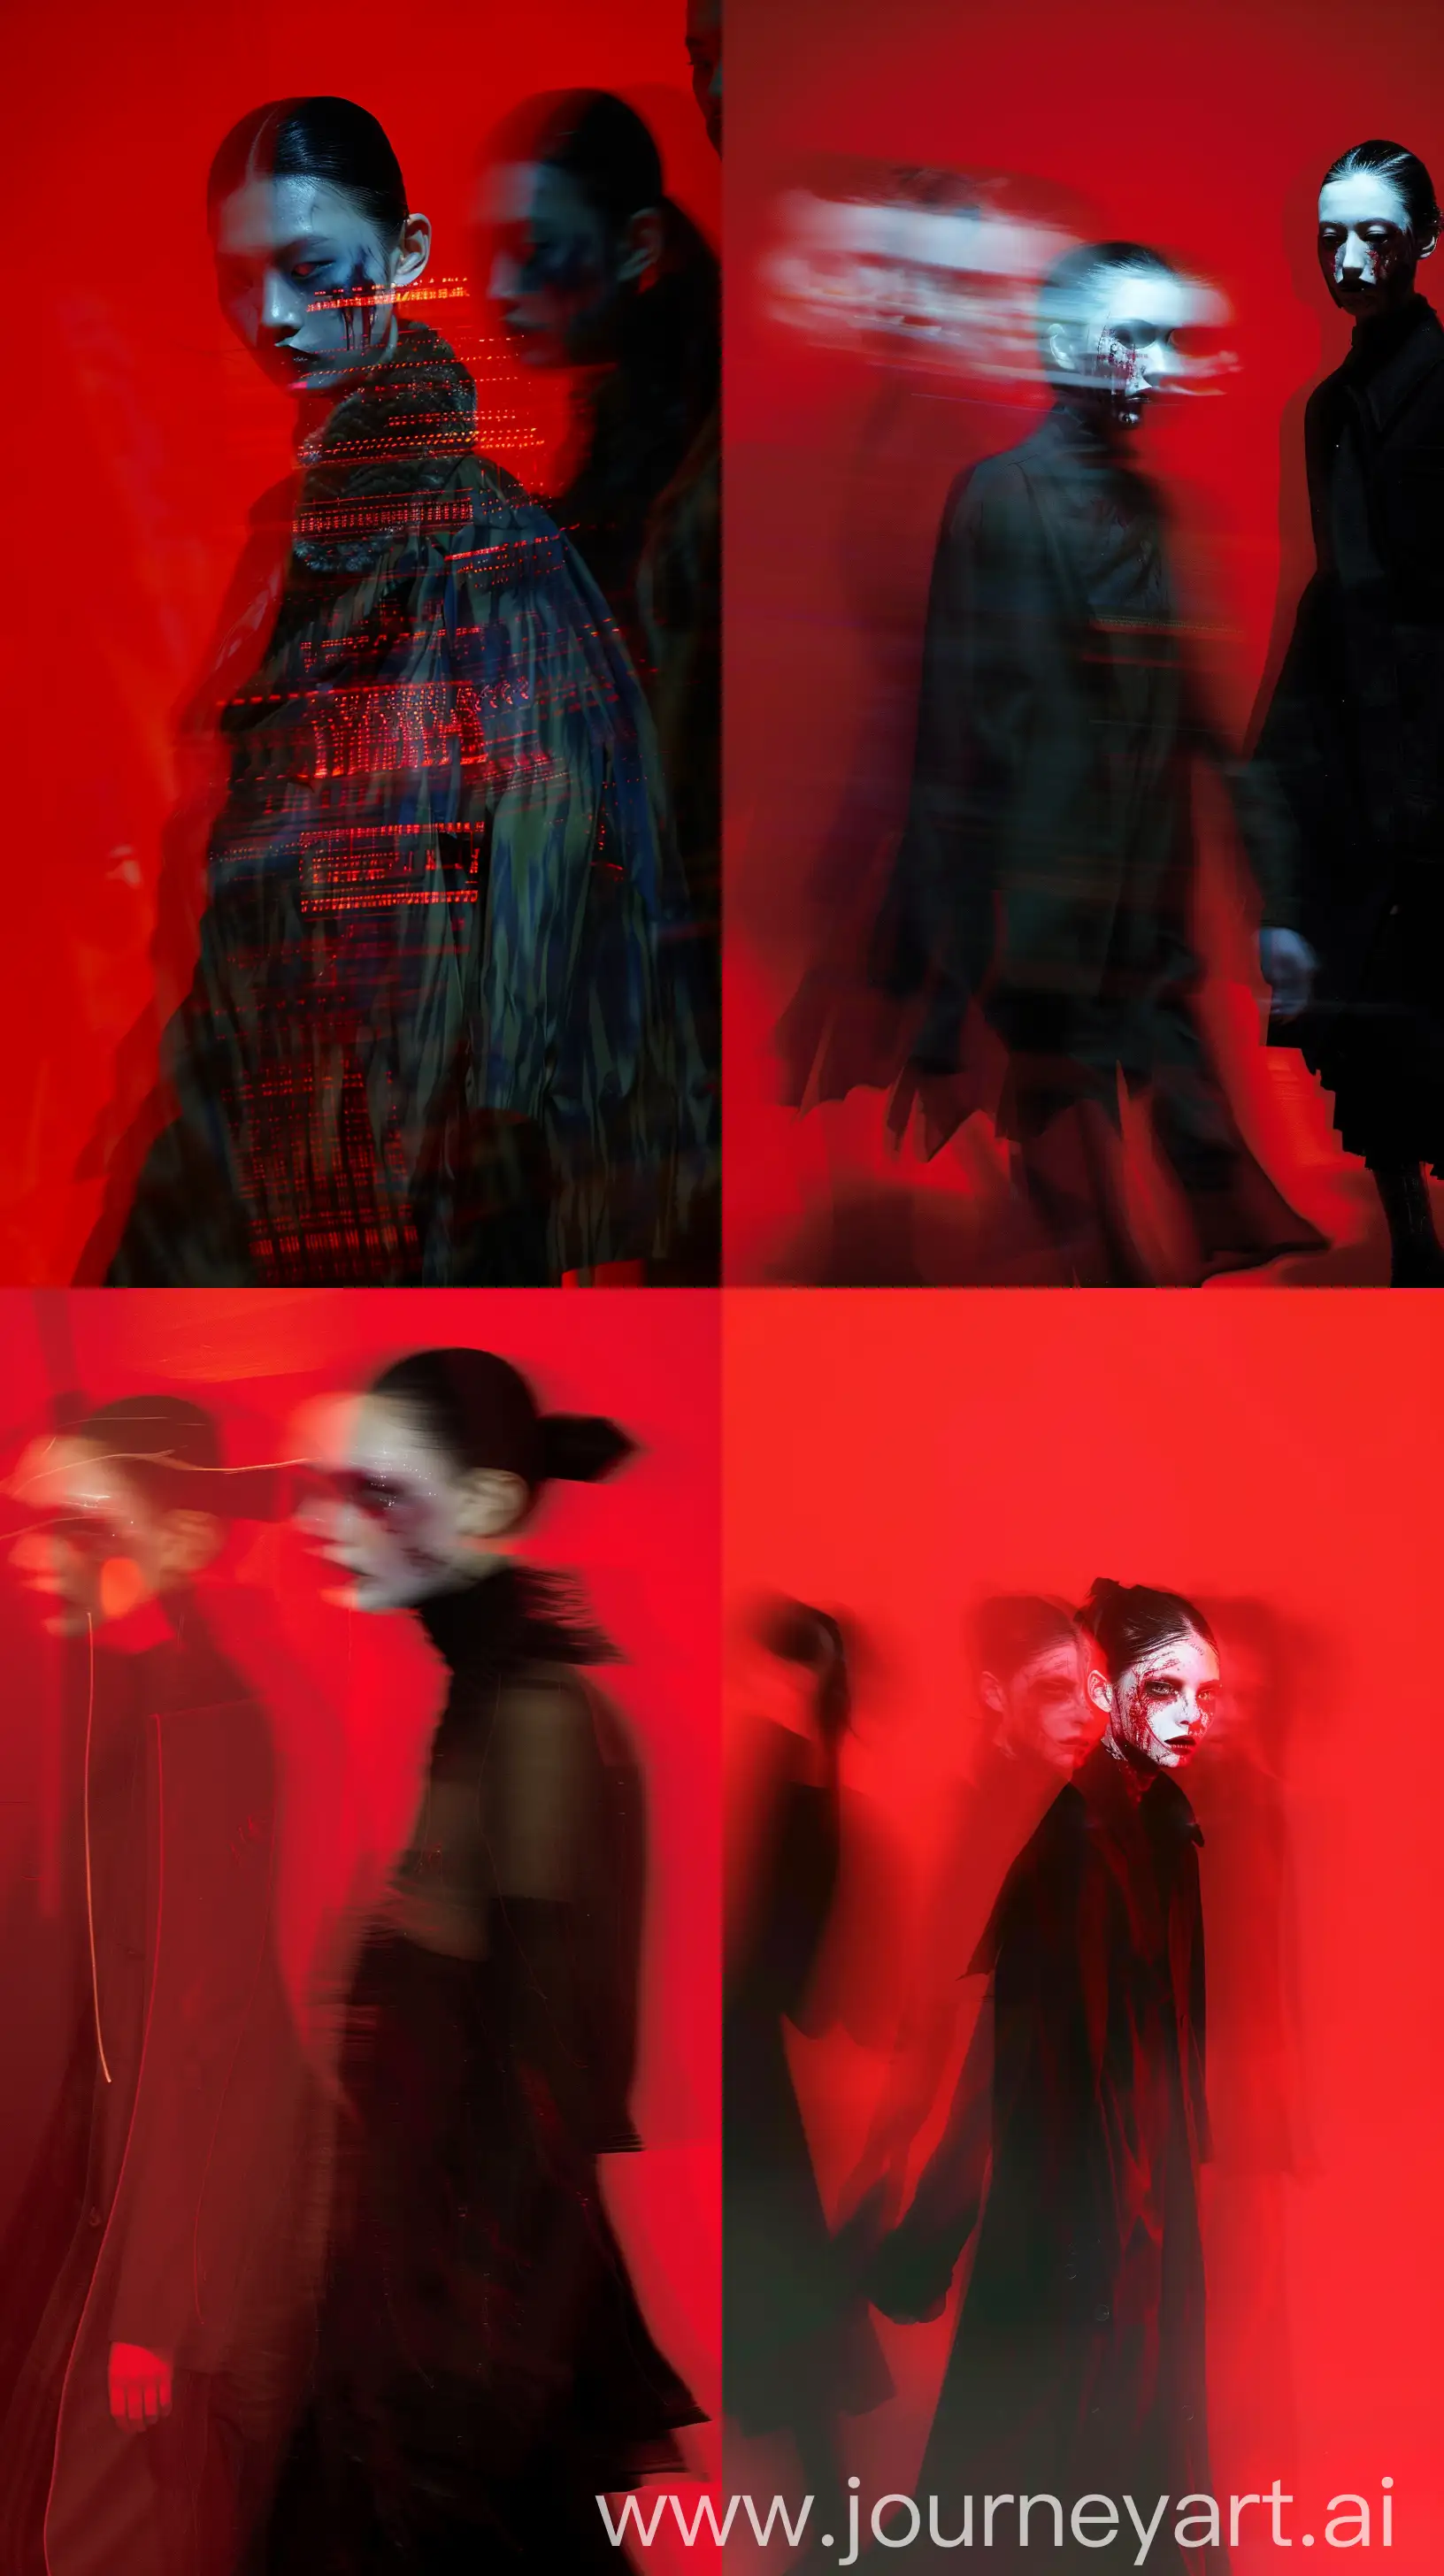 Ethereal-Oriental-Balenciaga-Fashion-Show-in-Red-Ambiance